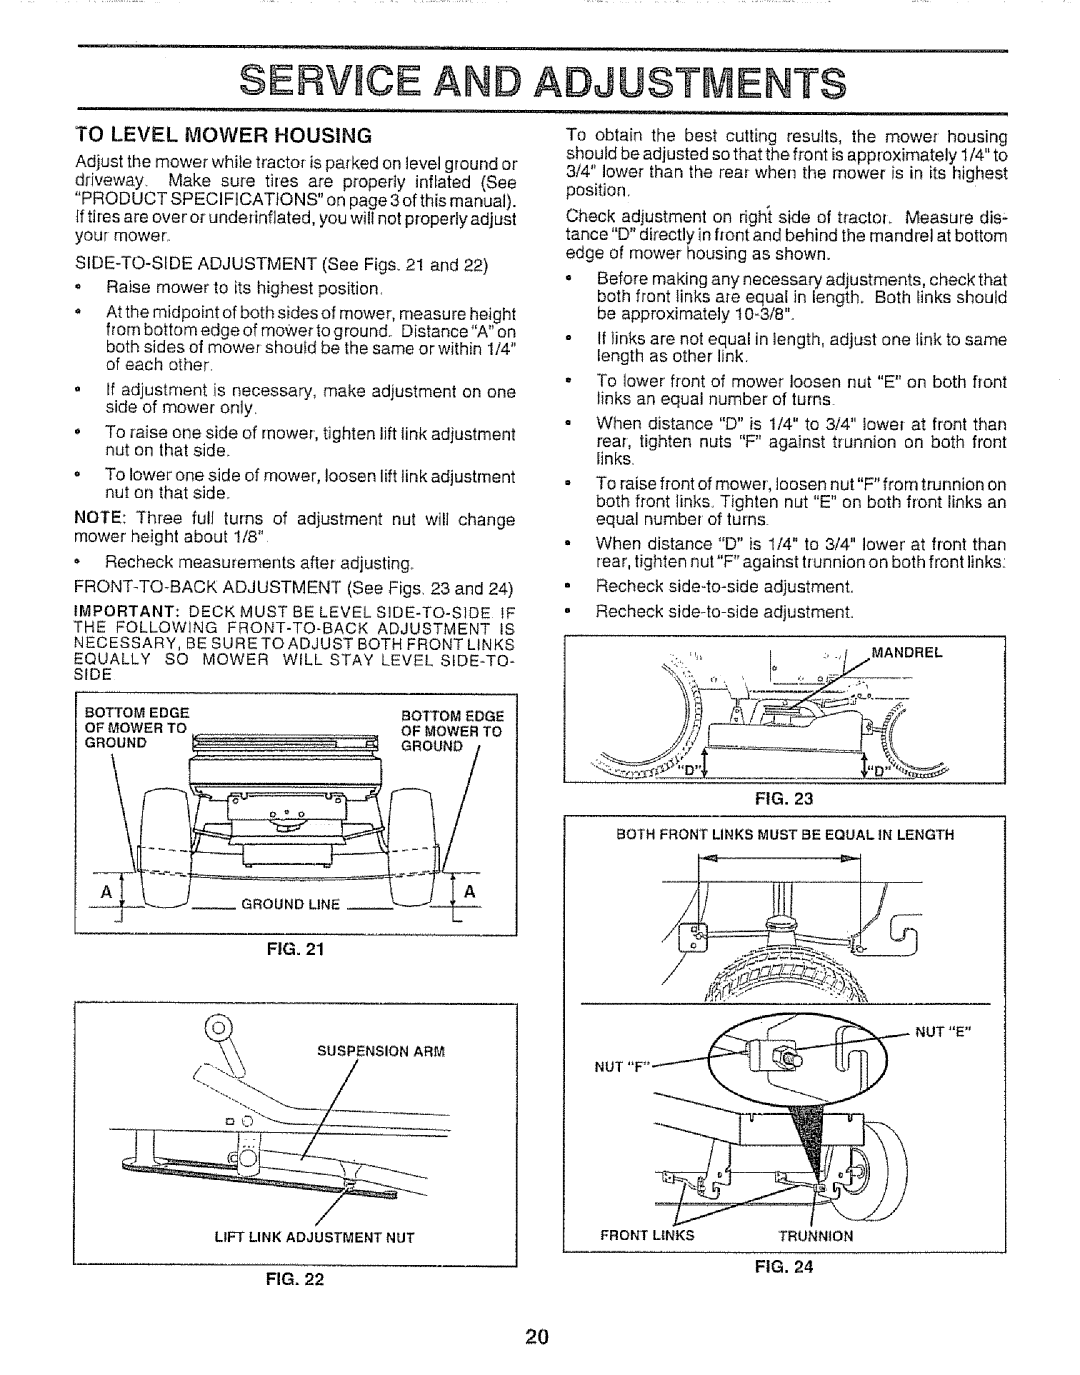 Sears 917.257651 owner manual Servmce And Adjustments, To Level Mower Housing 